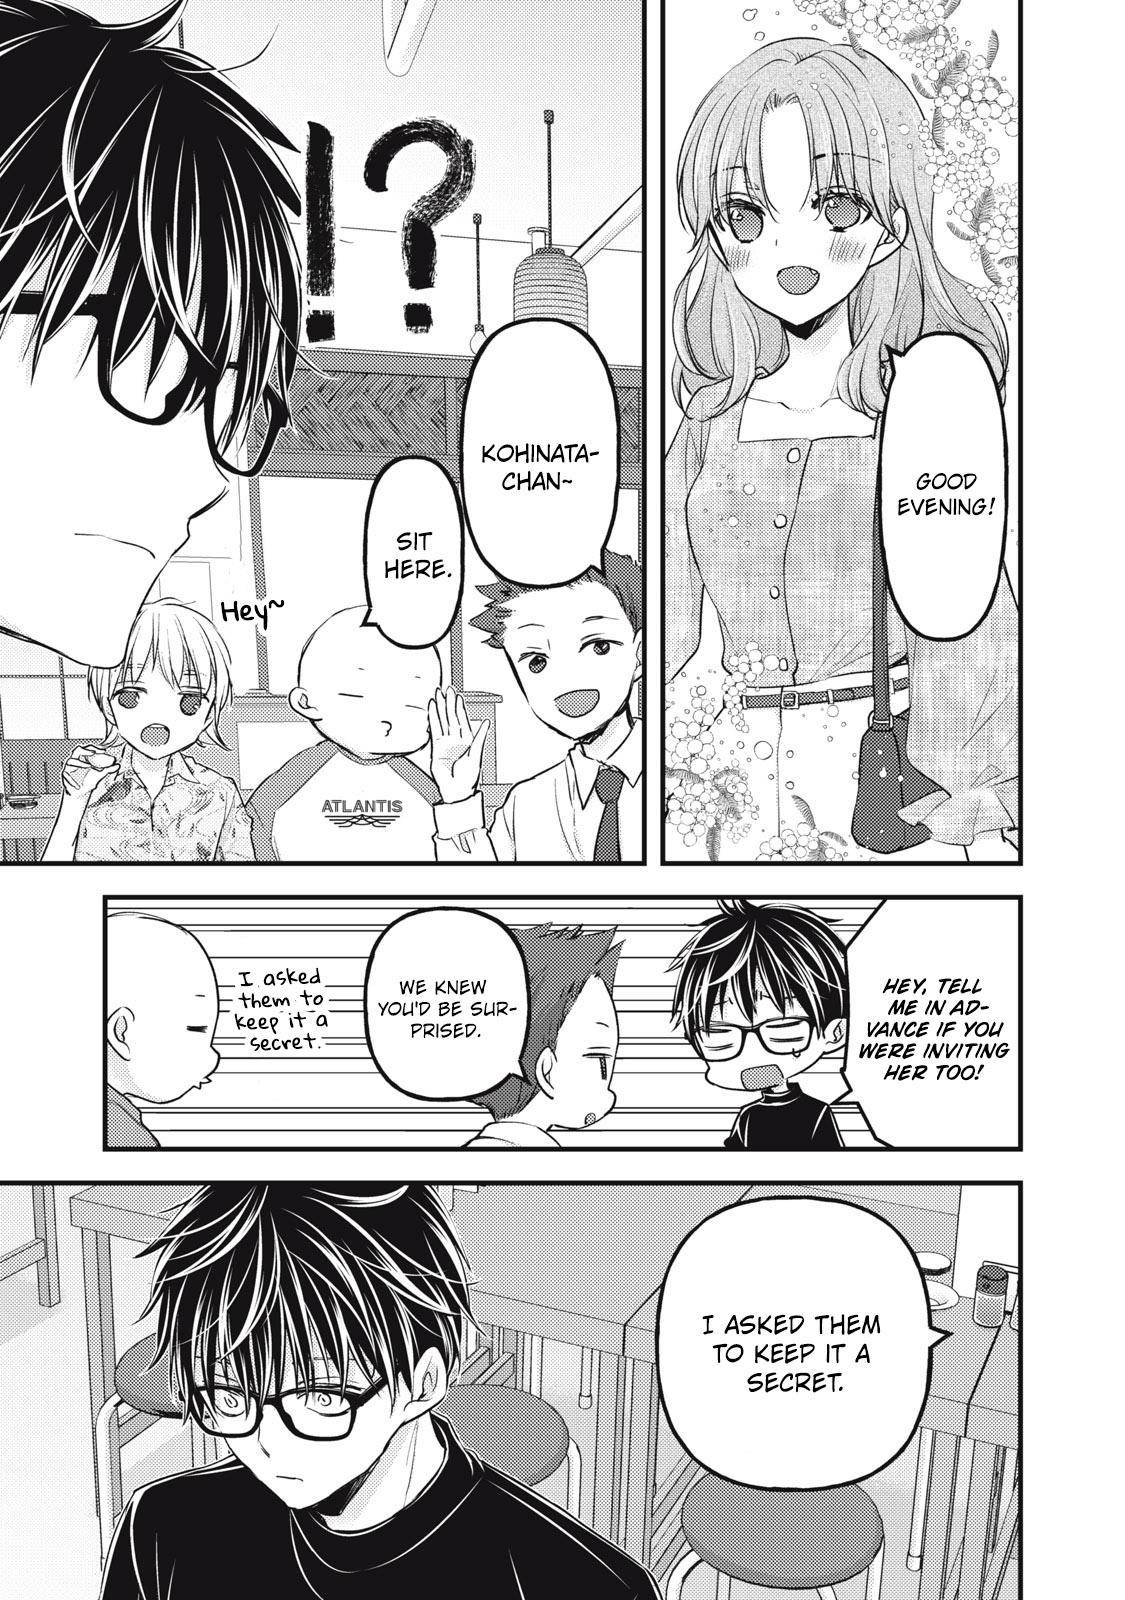 We May Be an Inexperienced Couple but... chapter 91 page 4